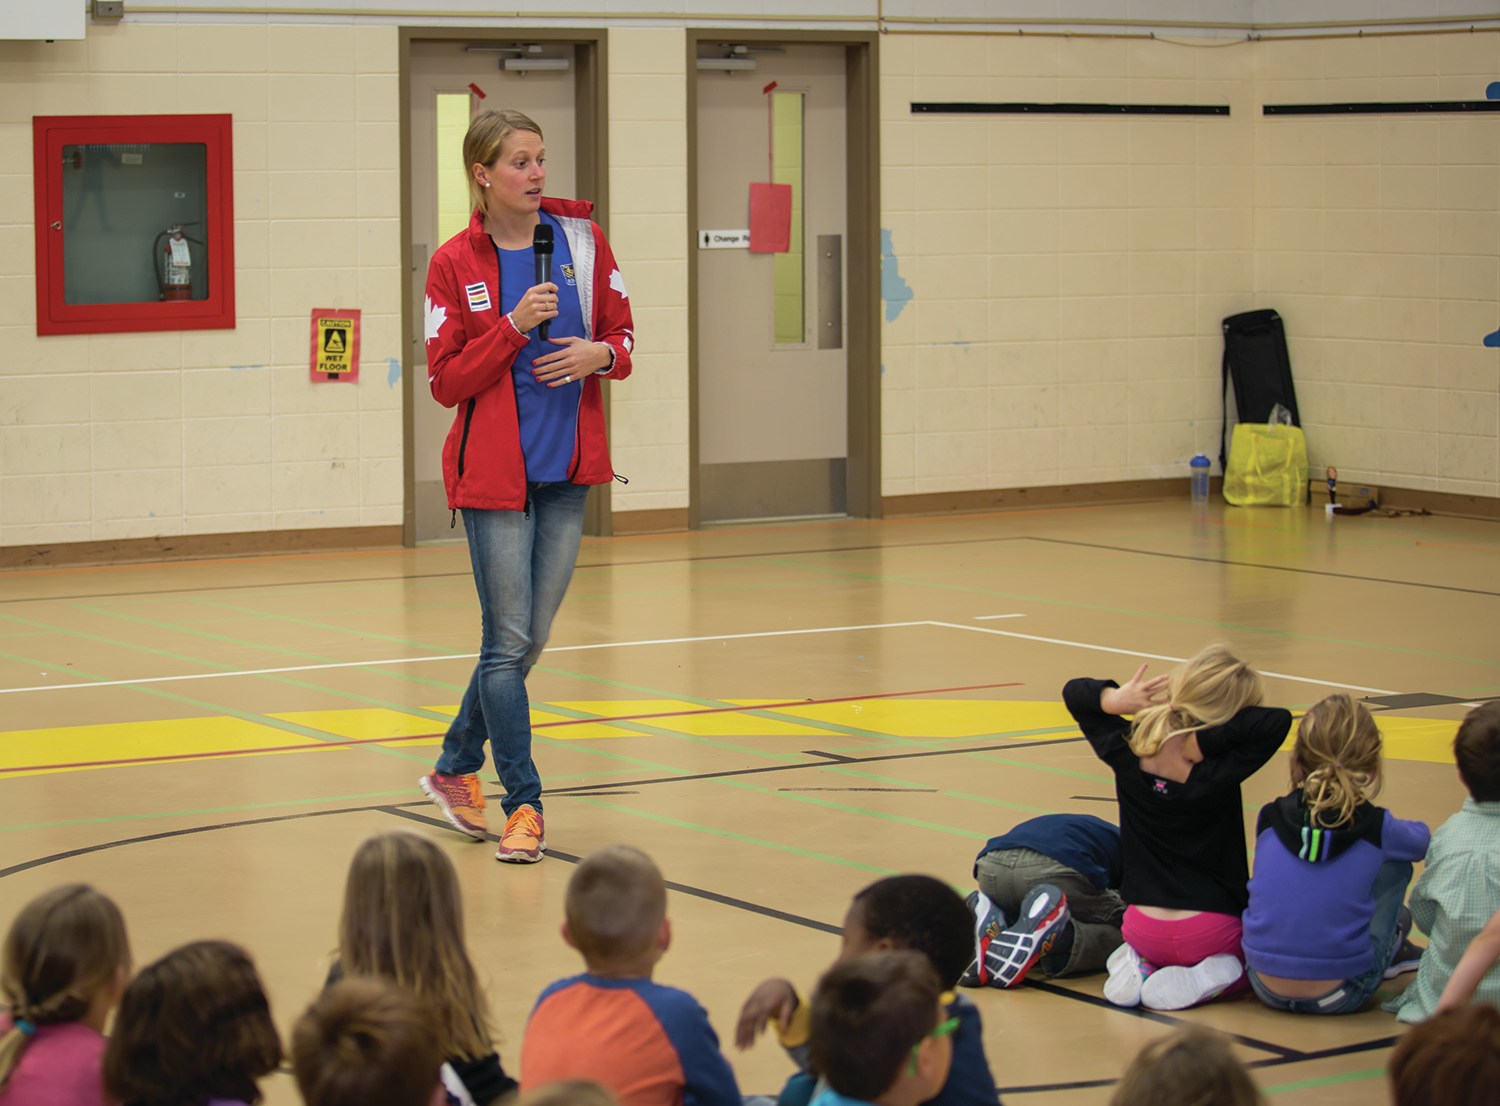 INSPIRATIONAL - Canadian Olympic swimmer Martha McCabe spoke to students at Mountview Elementary School last week. The stop was part of a cross-Canada tour that McCabe has been making over the past month.